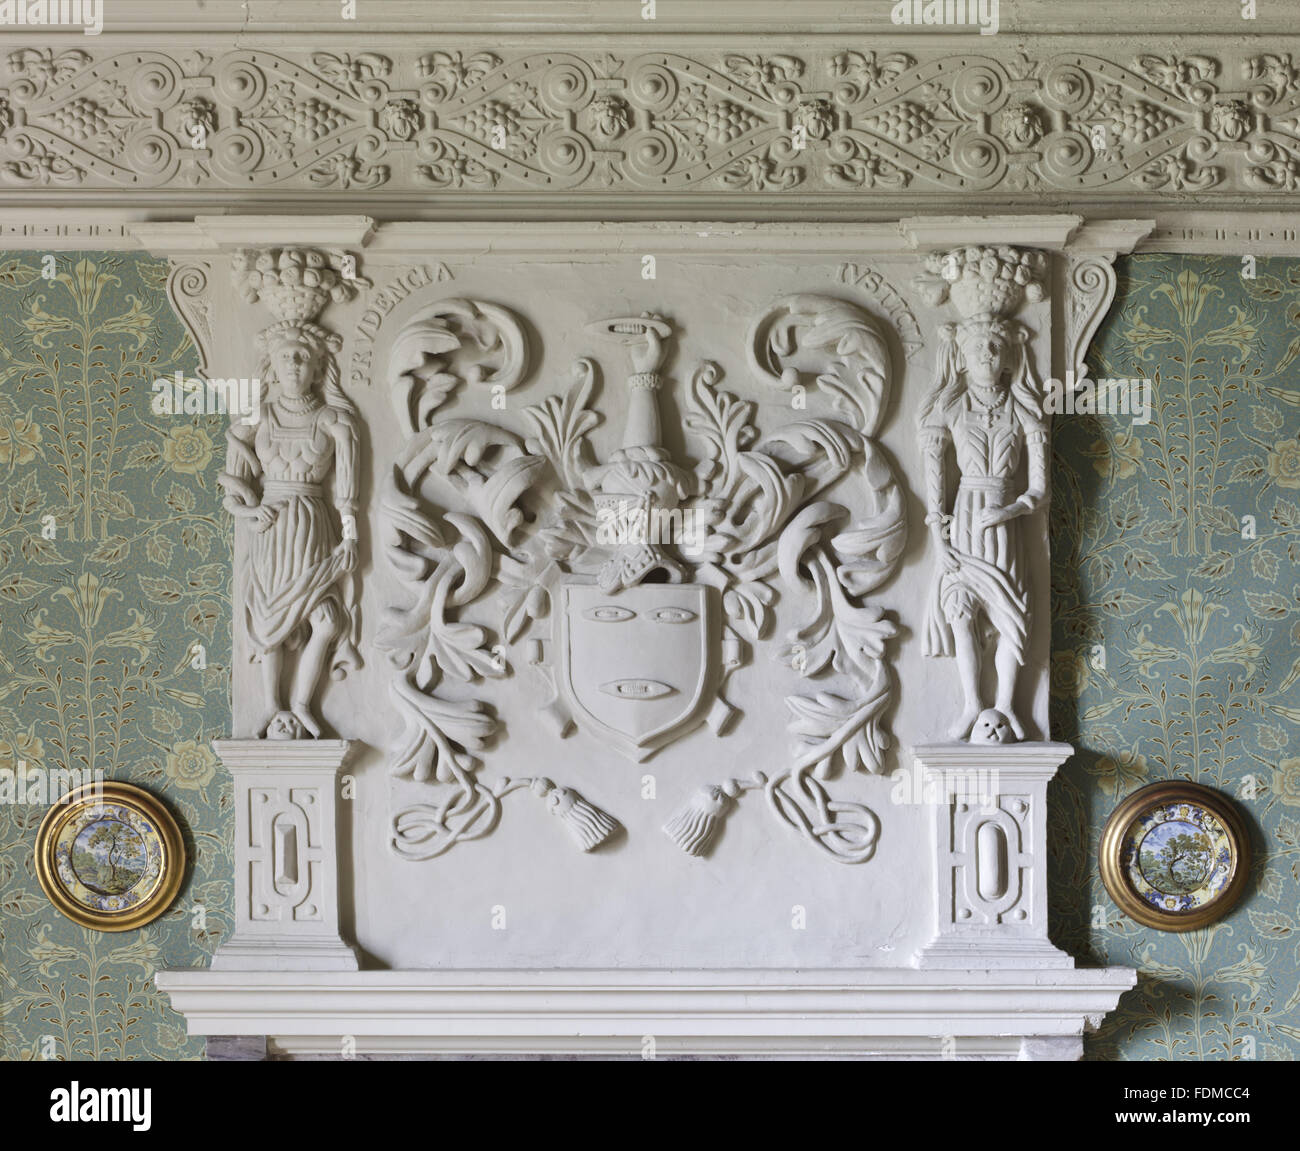 Plasterwork overmantel in the Huntroyde Room at Gawthorpe Hall, Lancashire. The overmantel dates from 1604, by Francis and Thomas Gunby, and features the arms, helm, crest and motto of the Shuttleworths, supported by two female figures representing the vi Stock Photo